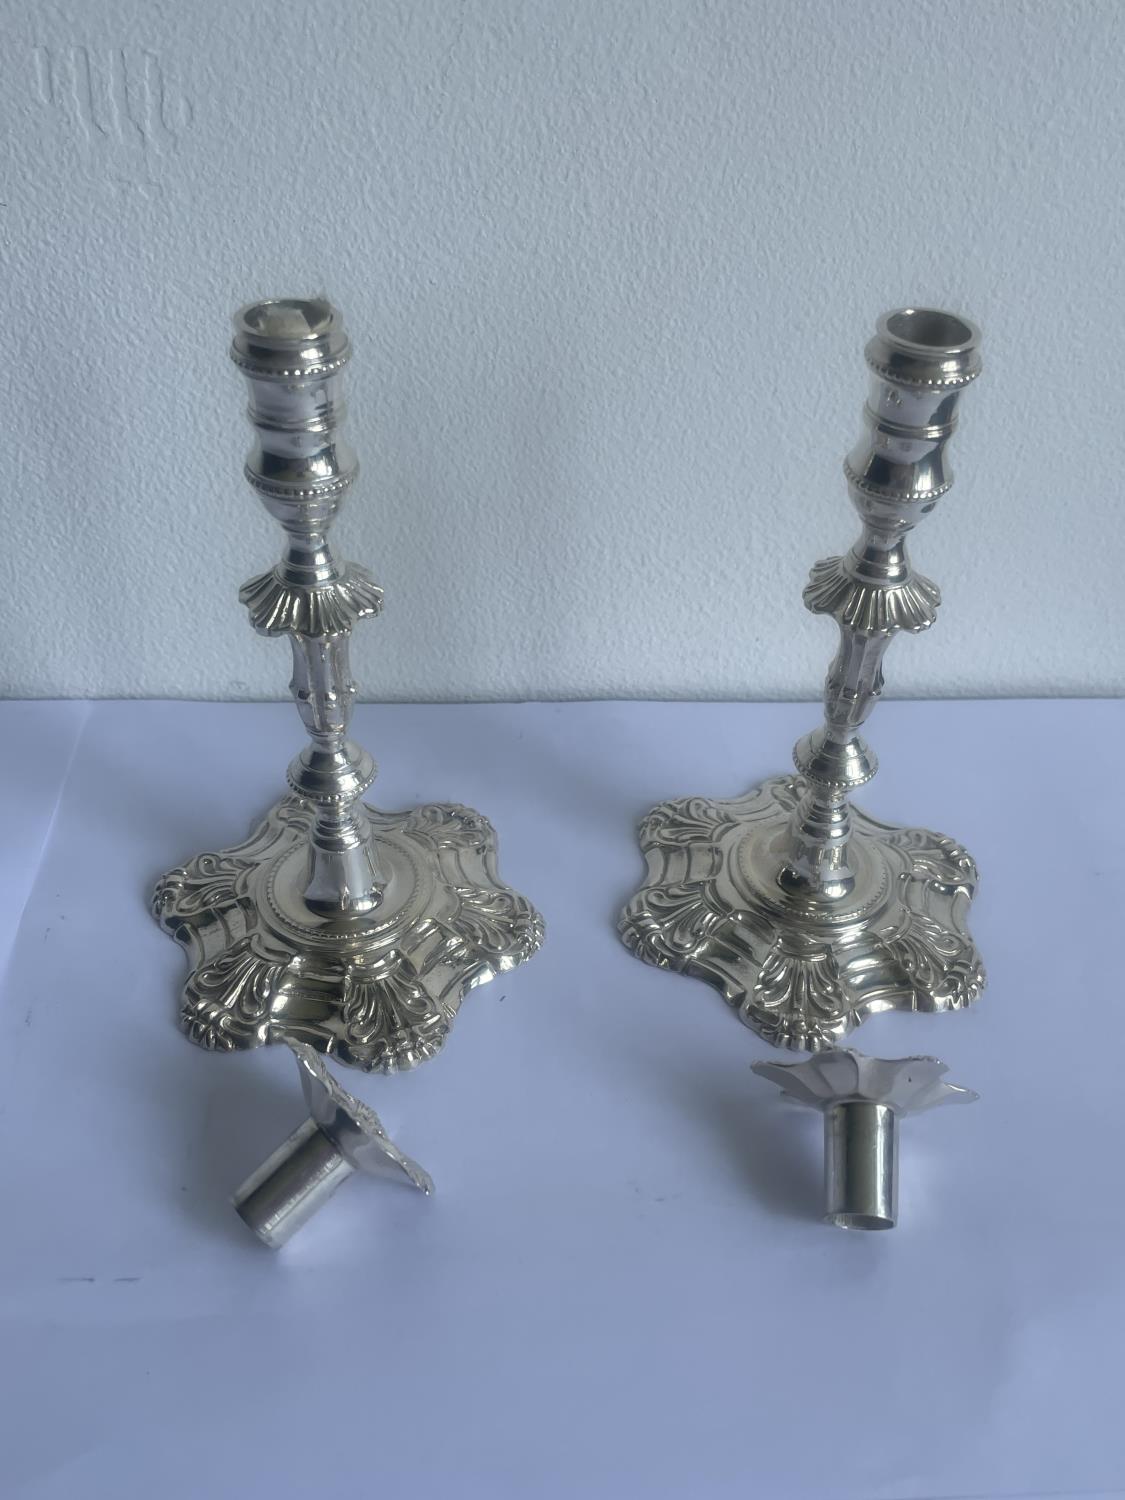 A PAIR OF DECORATIVE HALLMARKED BIRMINGHAM SILVER CANDLESTICKS GROSS WEIGHT 450 GRAMS - Image 3 of 6